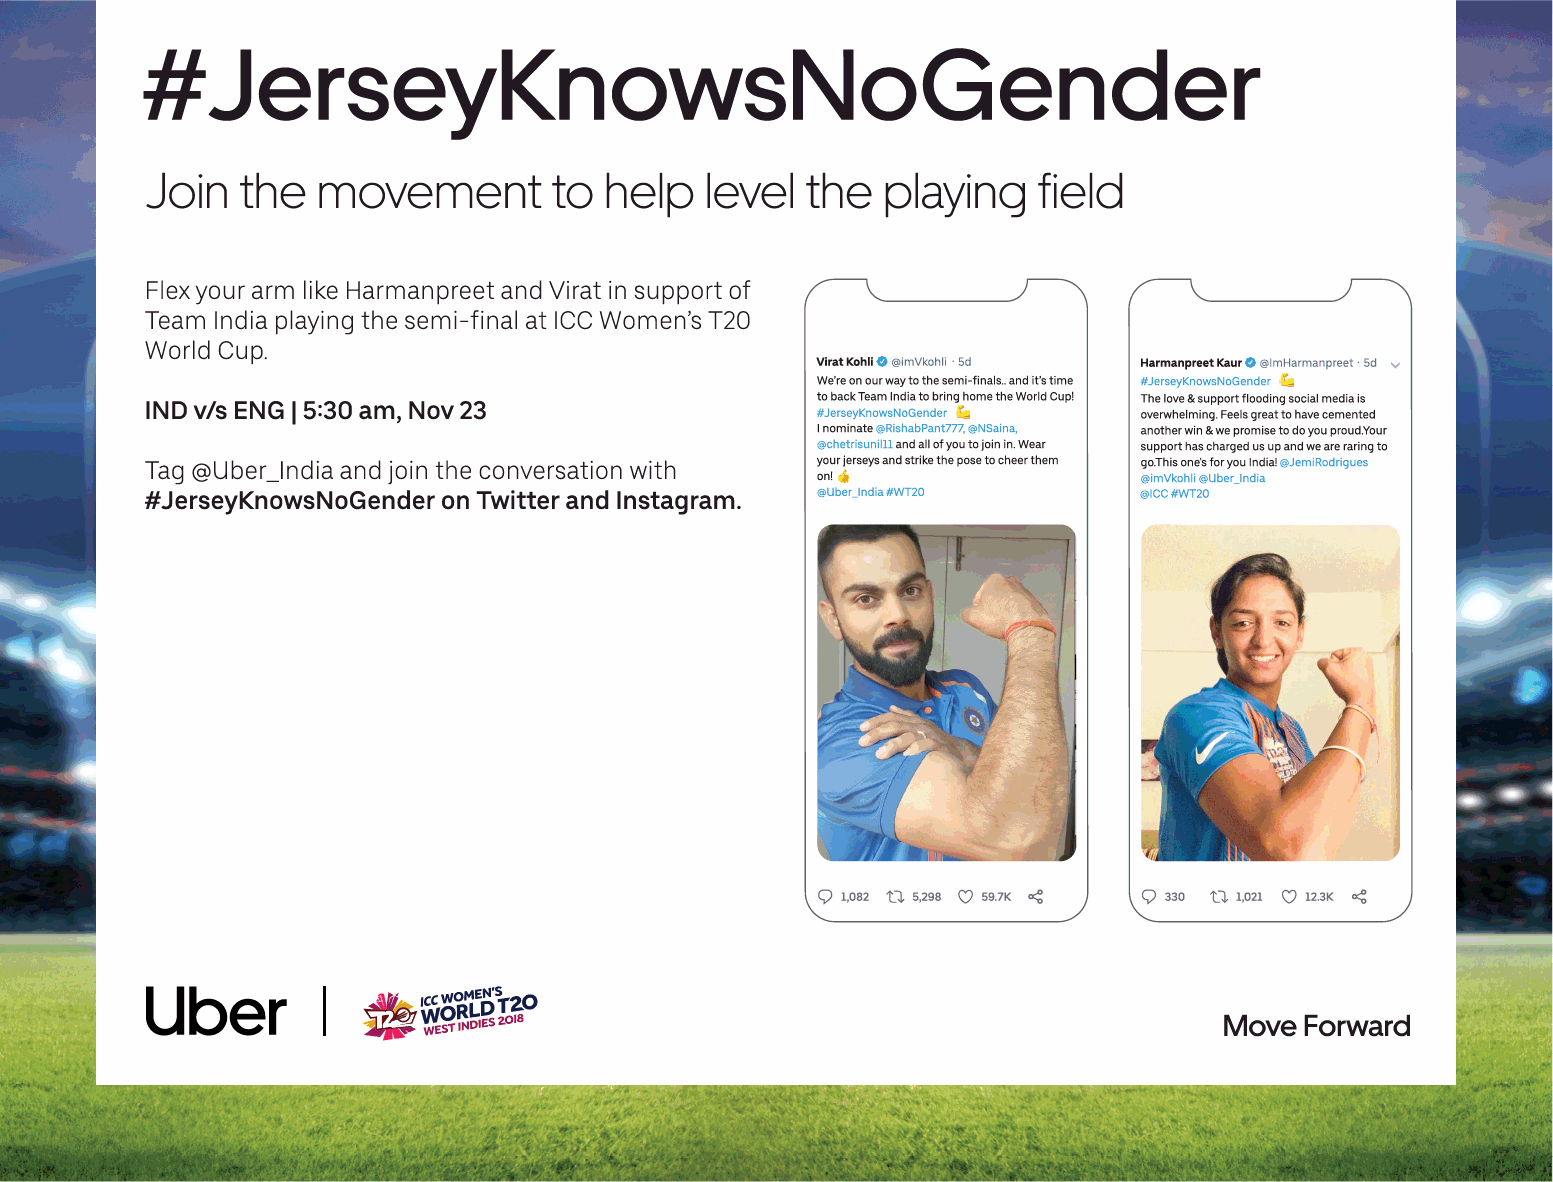 uber-jersey-knows-no-gender-ad-times-of-india-mumbai-22-11-2018.png